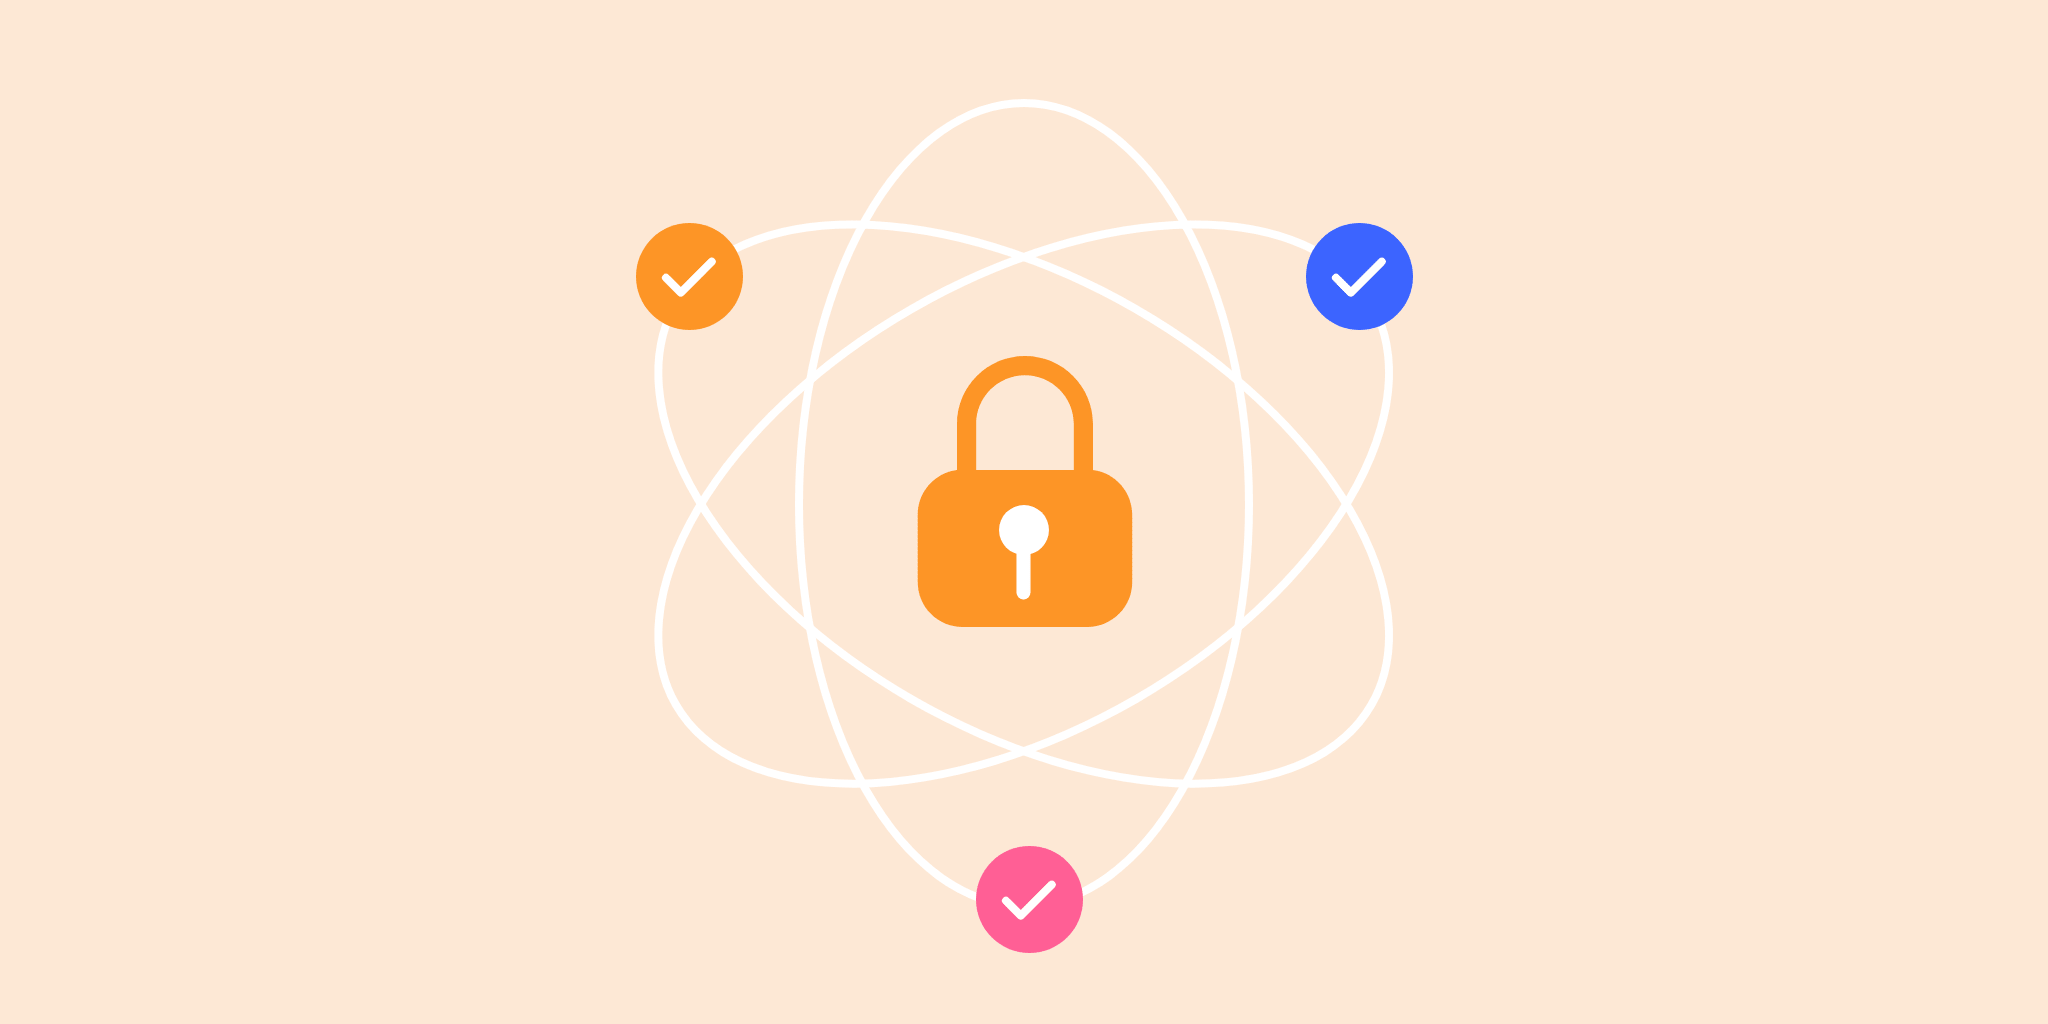 Why the security and safety of your data is Nozbe's biggest priority